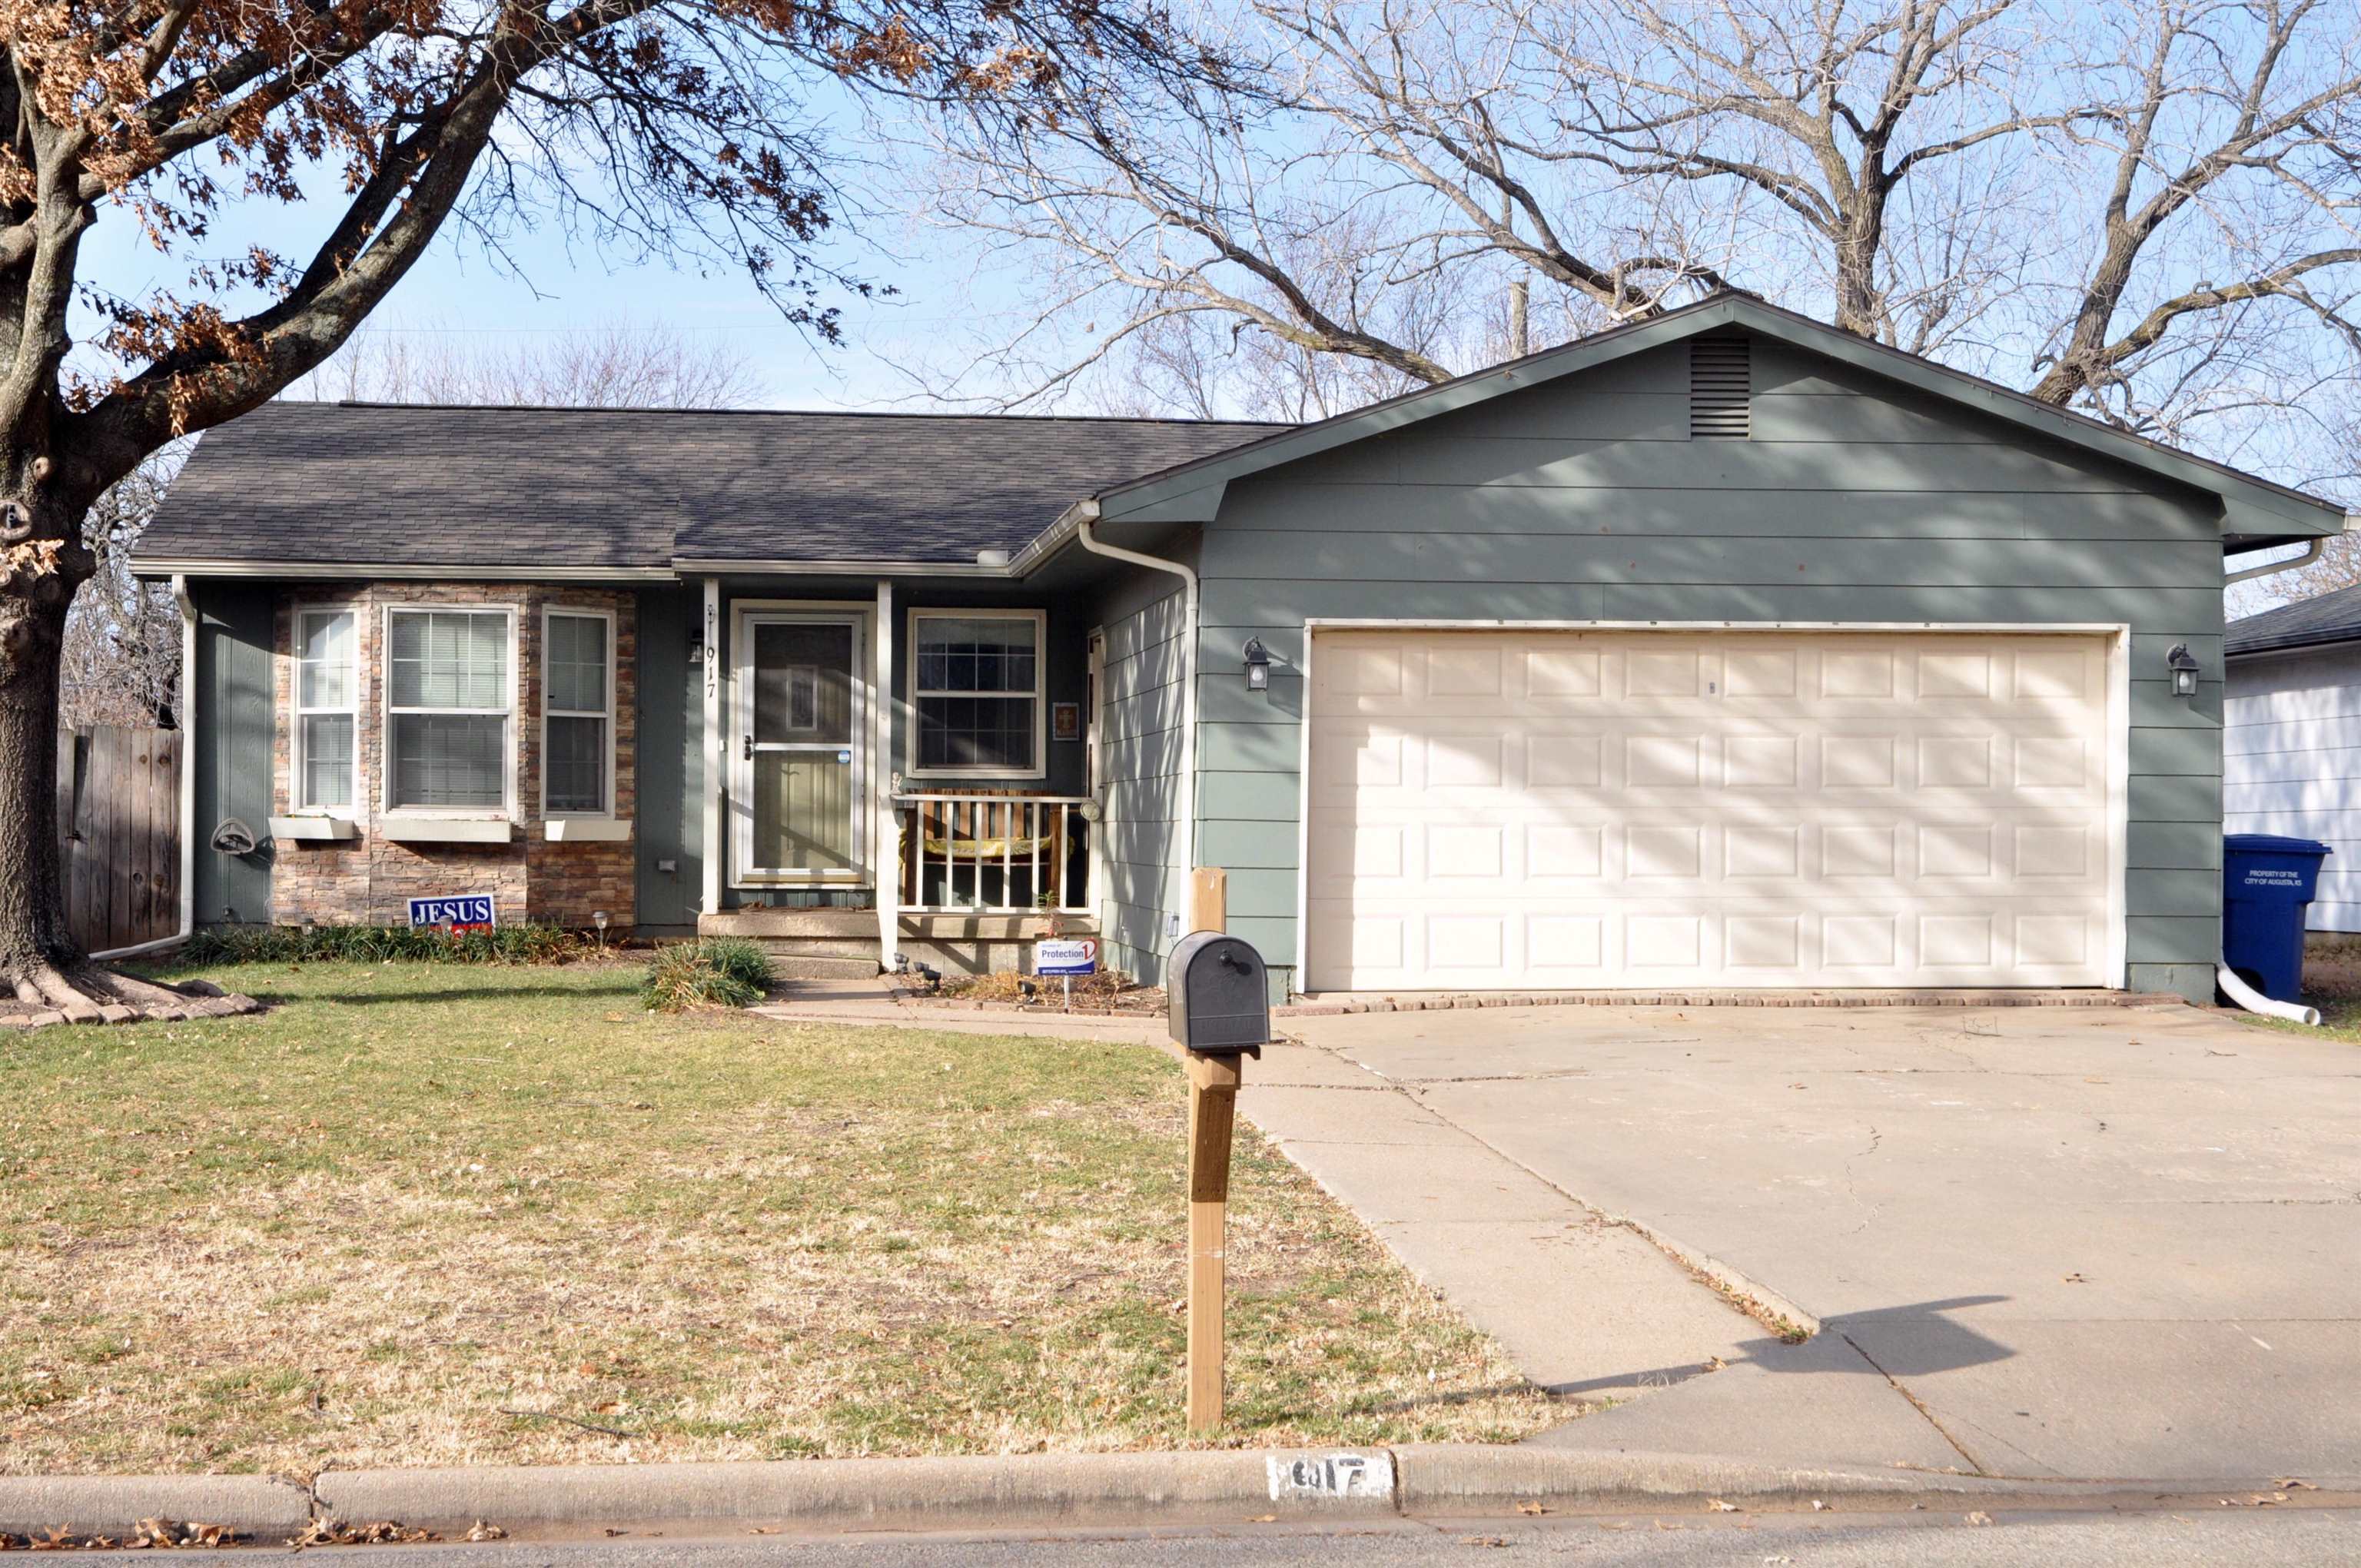 Don't miss your opportunity at small town living with many amenities and a short drive to Wichita!!!